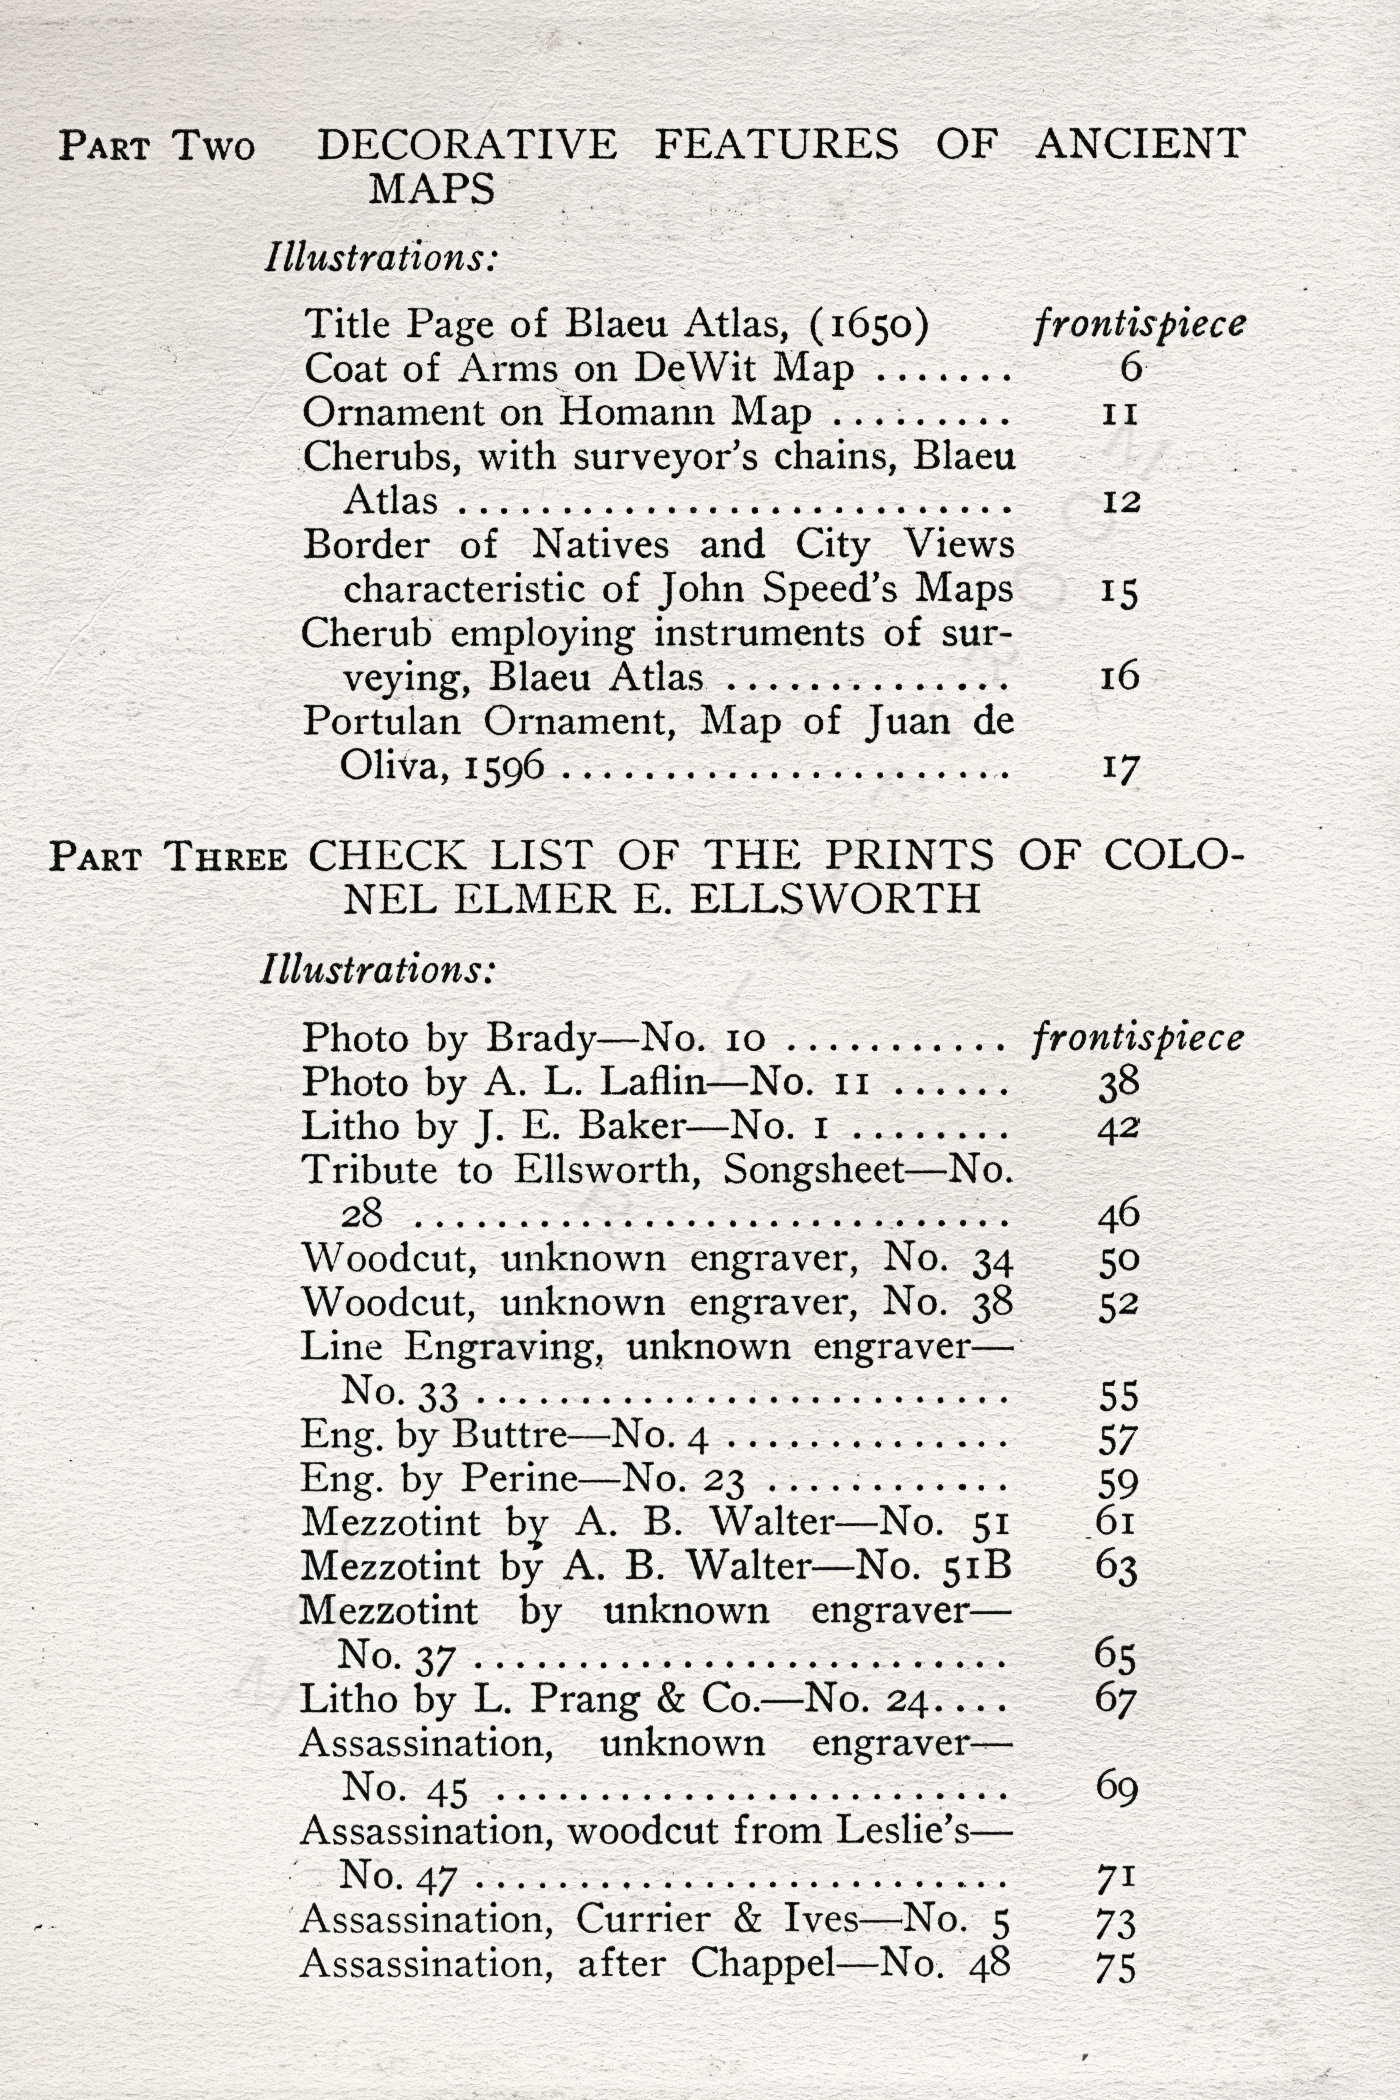 The Print
                      Connoisseur by Winfred Porter Truesdell printed by
                      the Moorsfield Press-July 1926